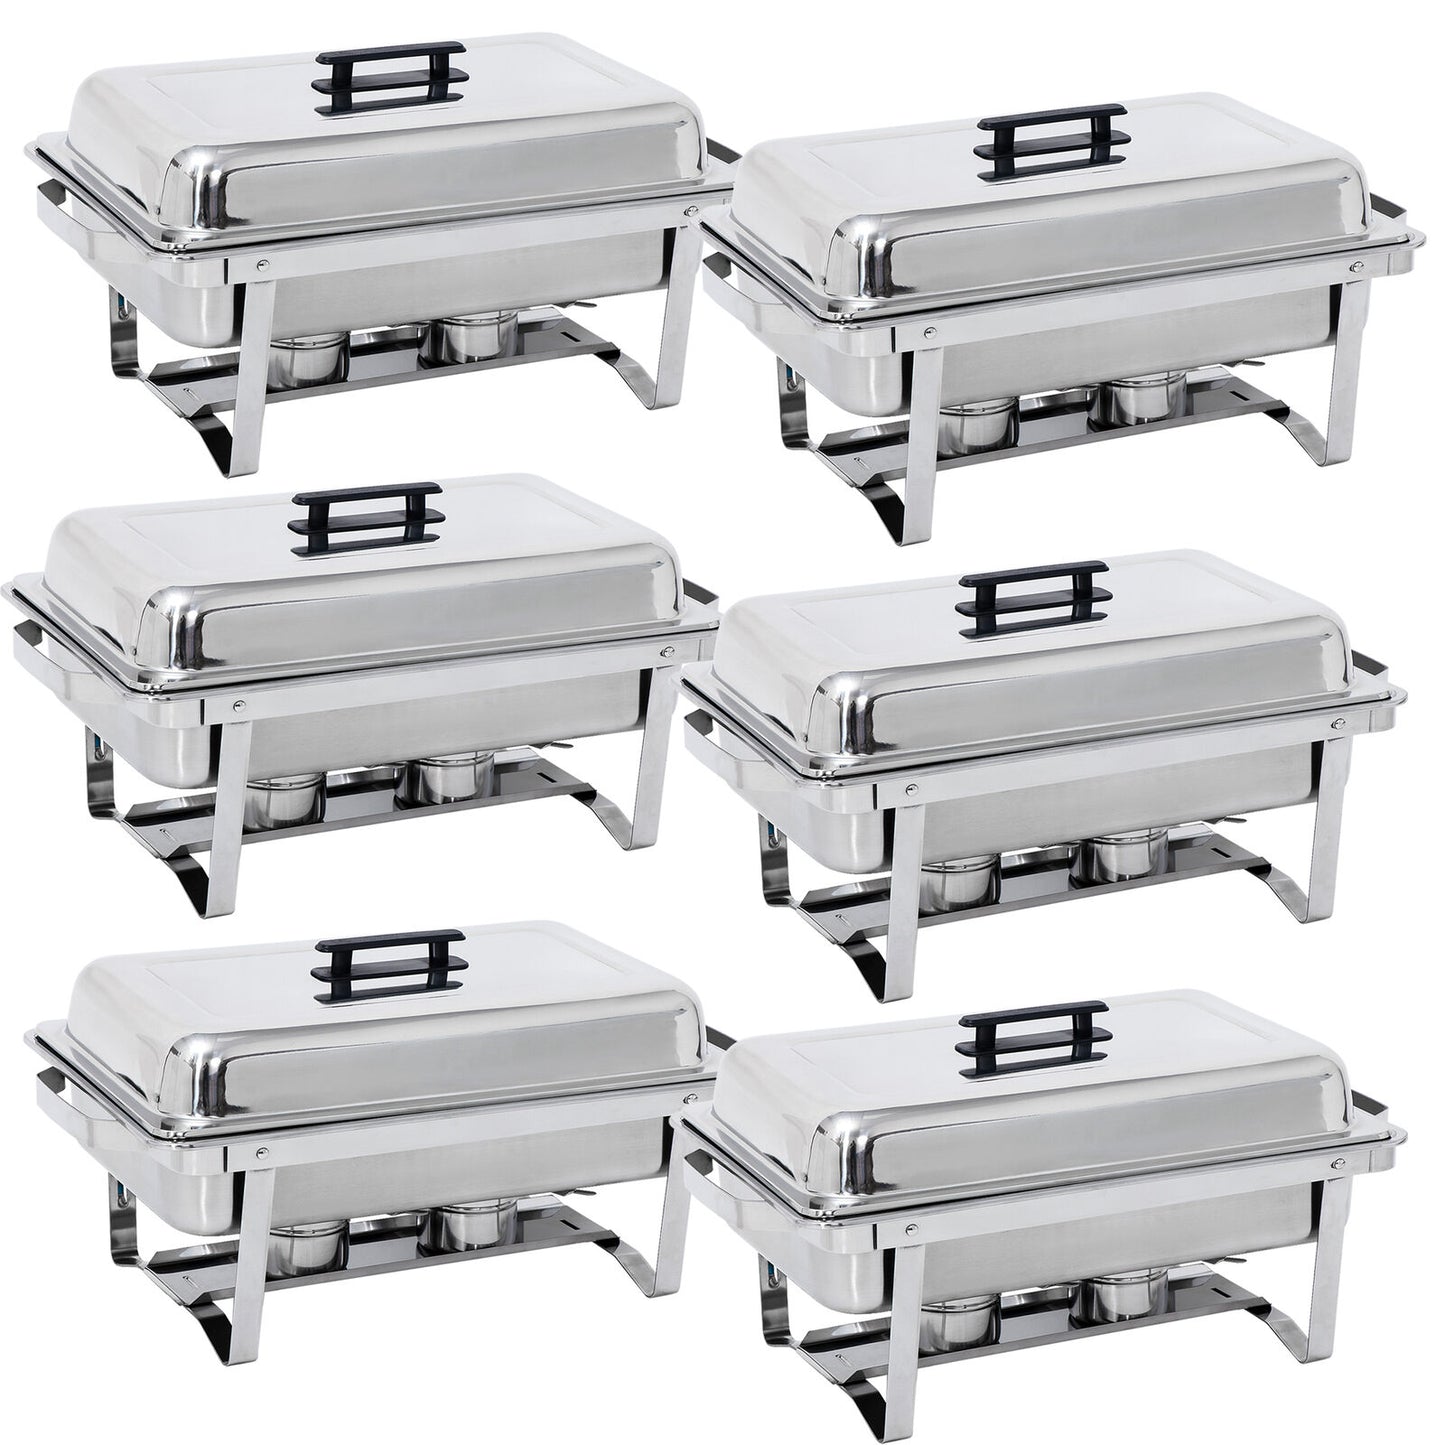 6 Pack 8QT Chafing Dish Food Warmer Stainless Steel Buffet Chafer W/Foldable Leg